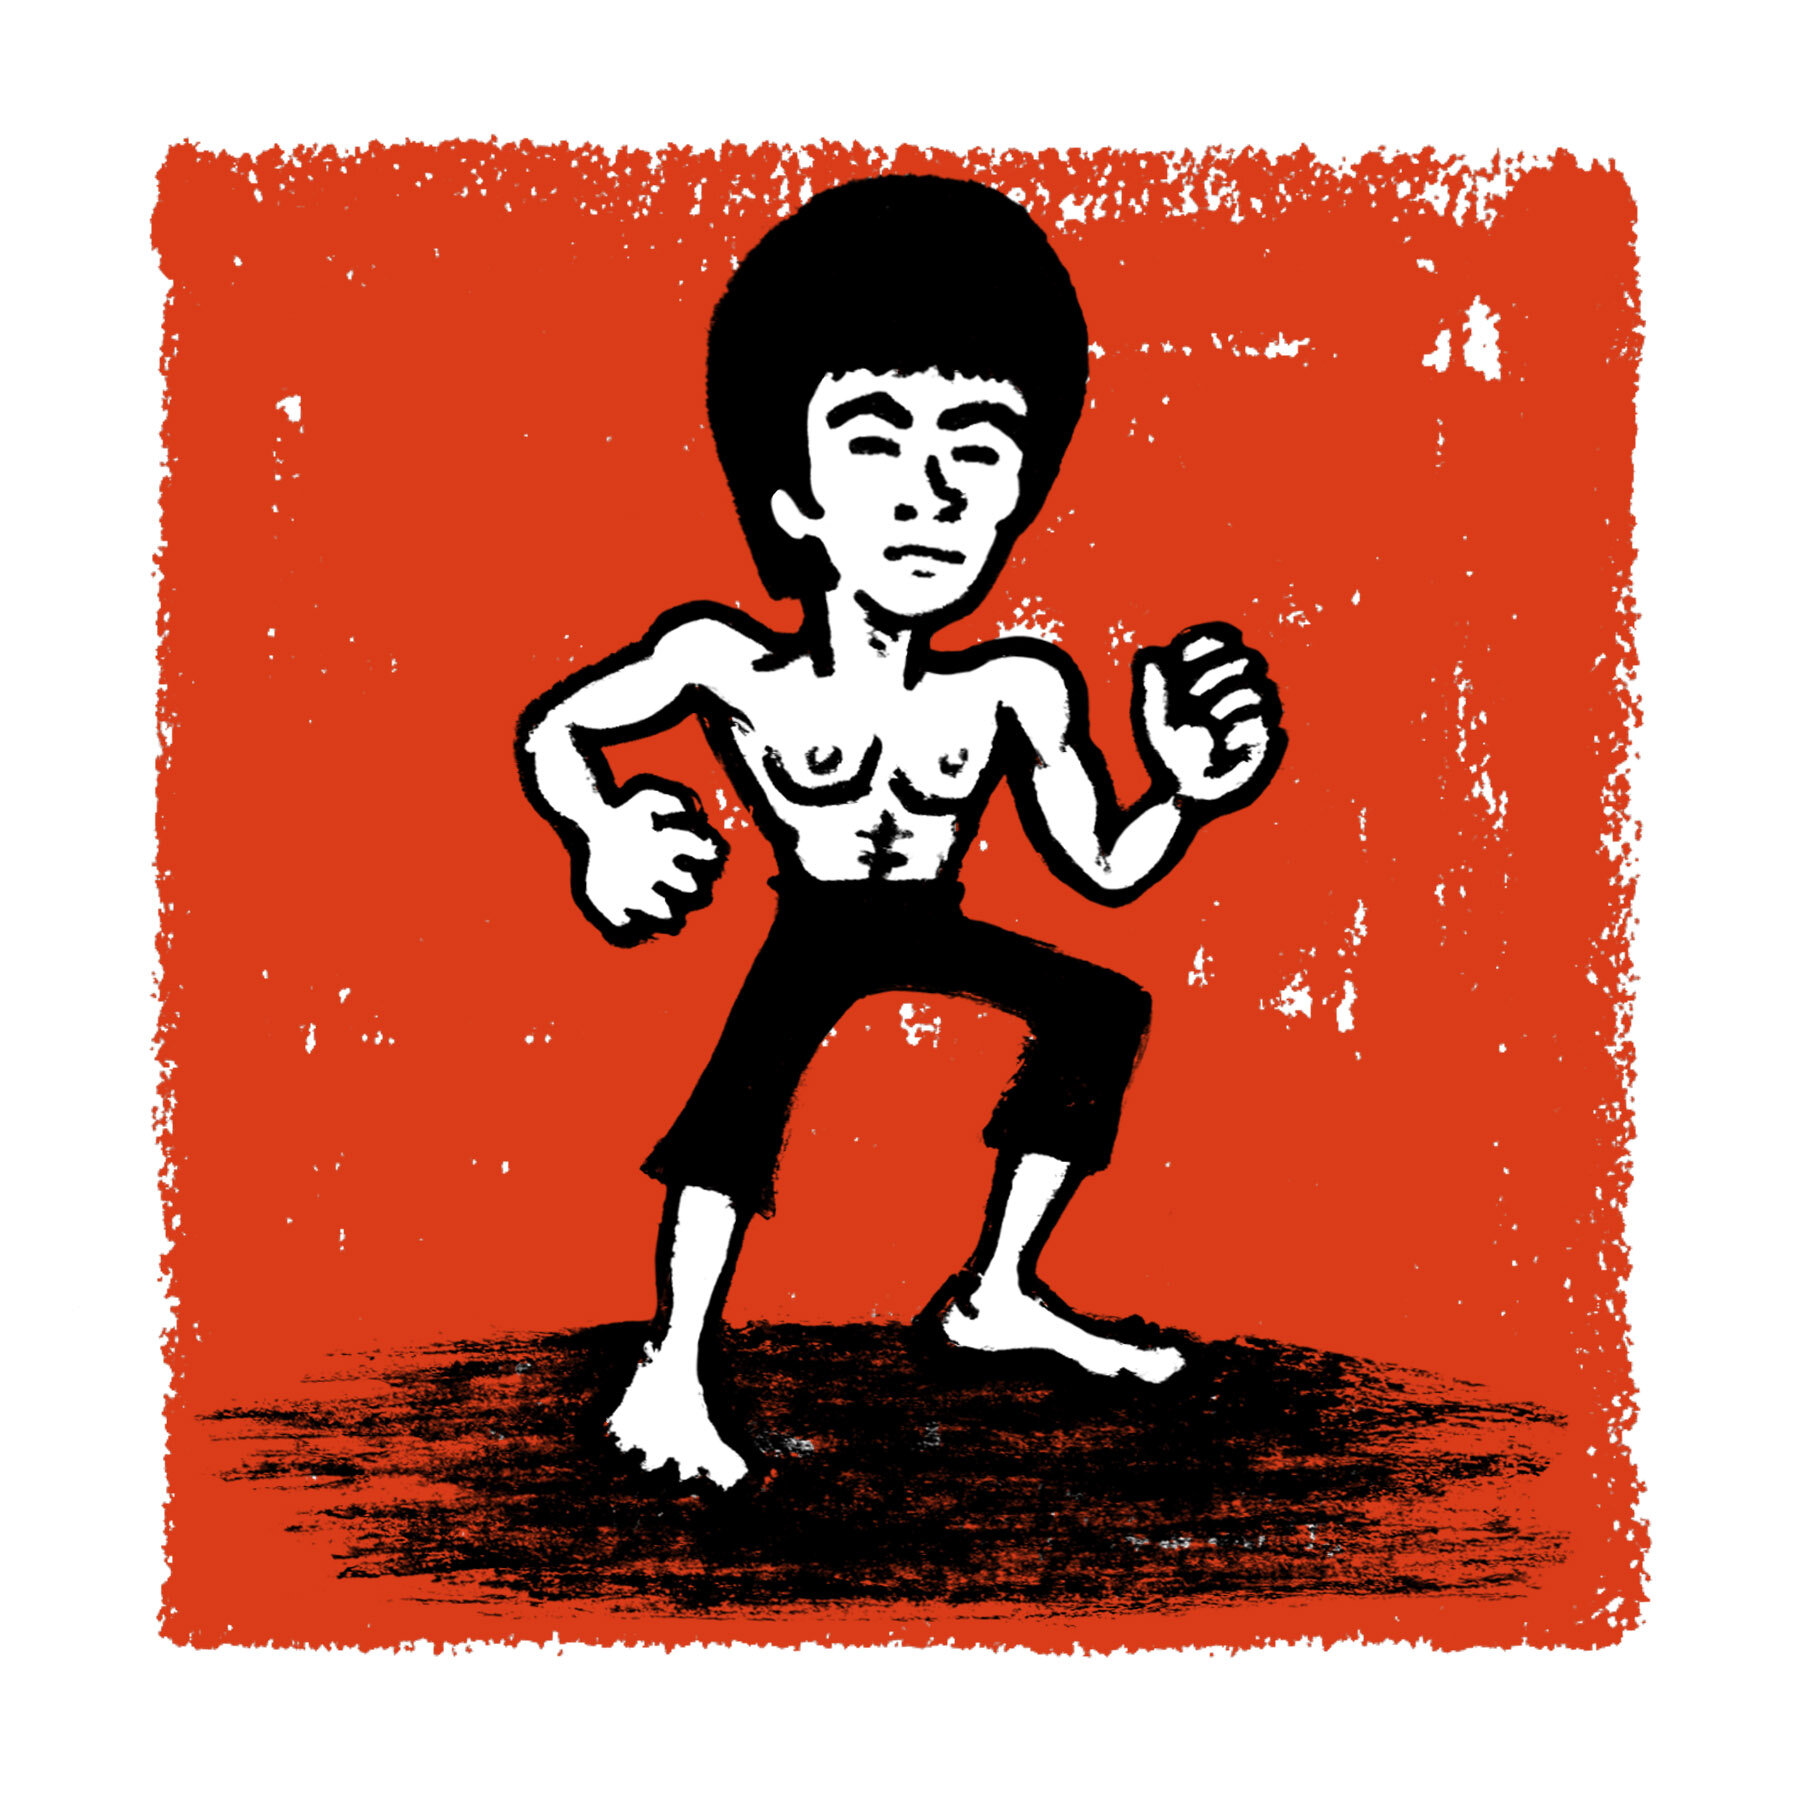 Three Portraits of Bruce Lee - The Ringer